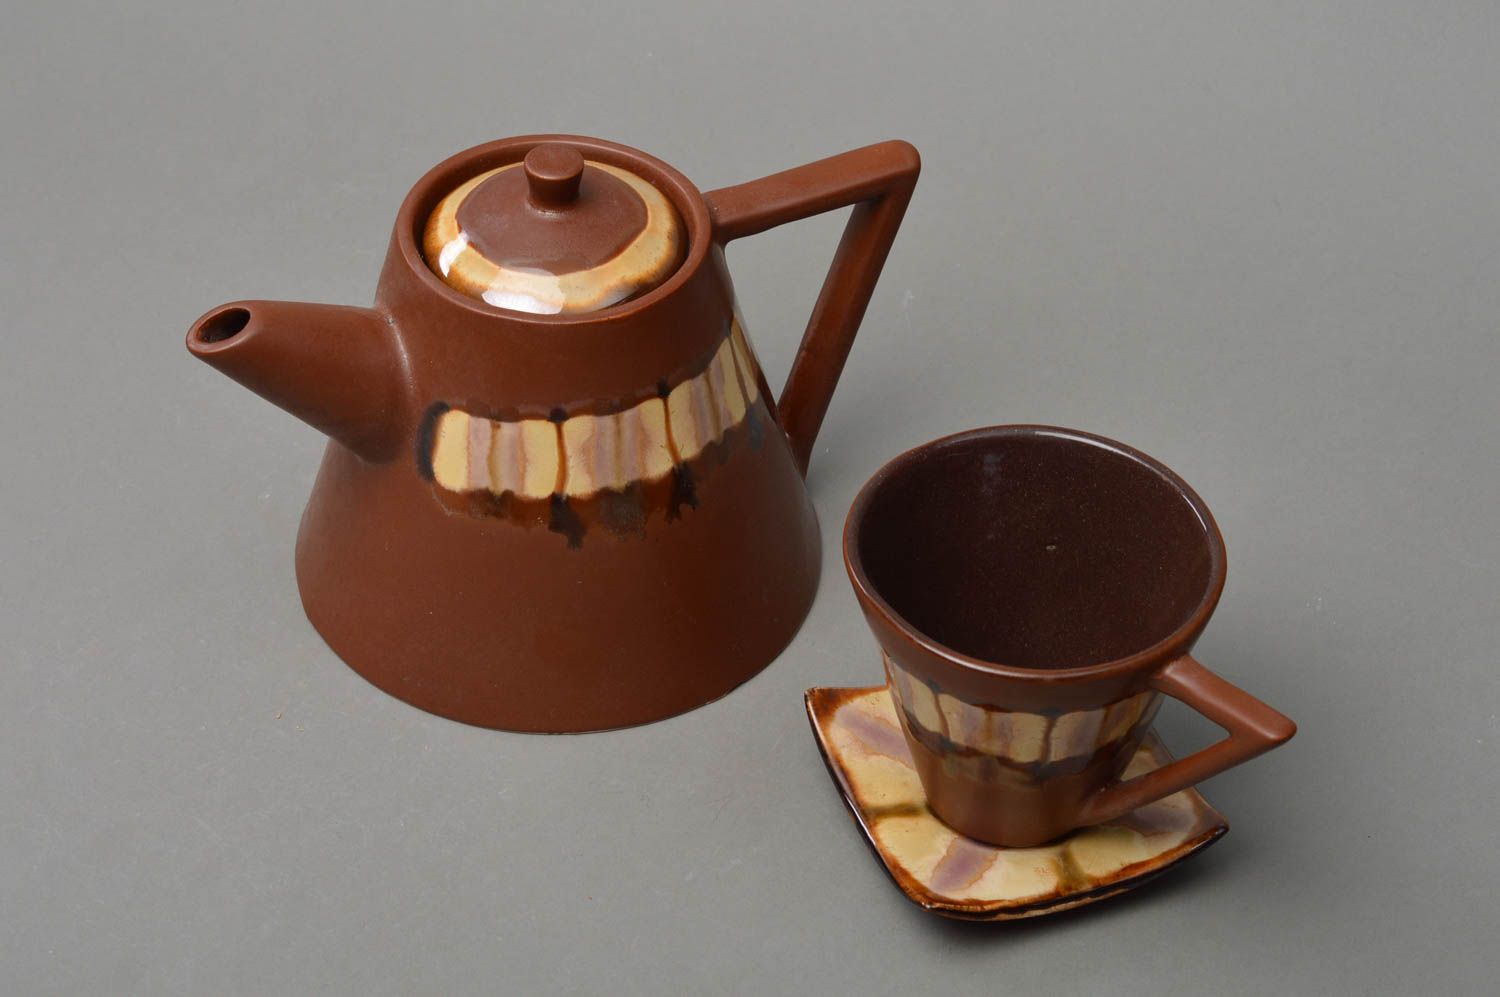 Art handmade pottery set of pyramid shape kettle and teacup in brown and beige color photo 2